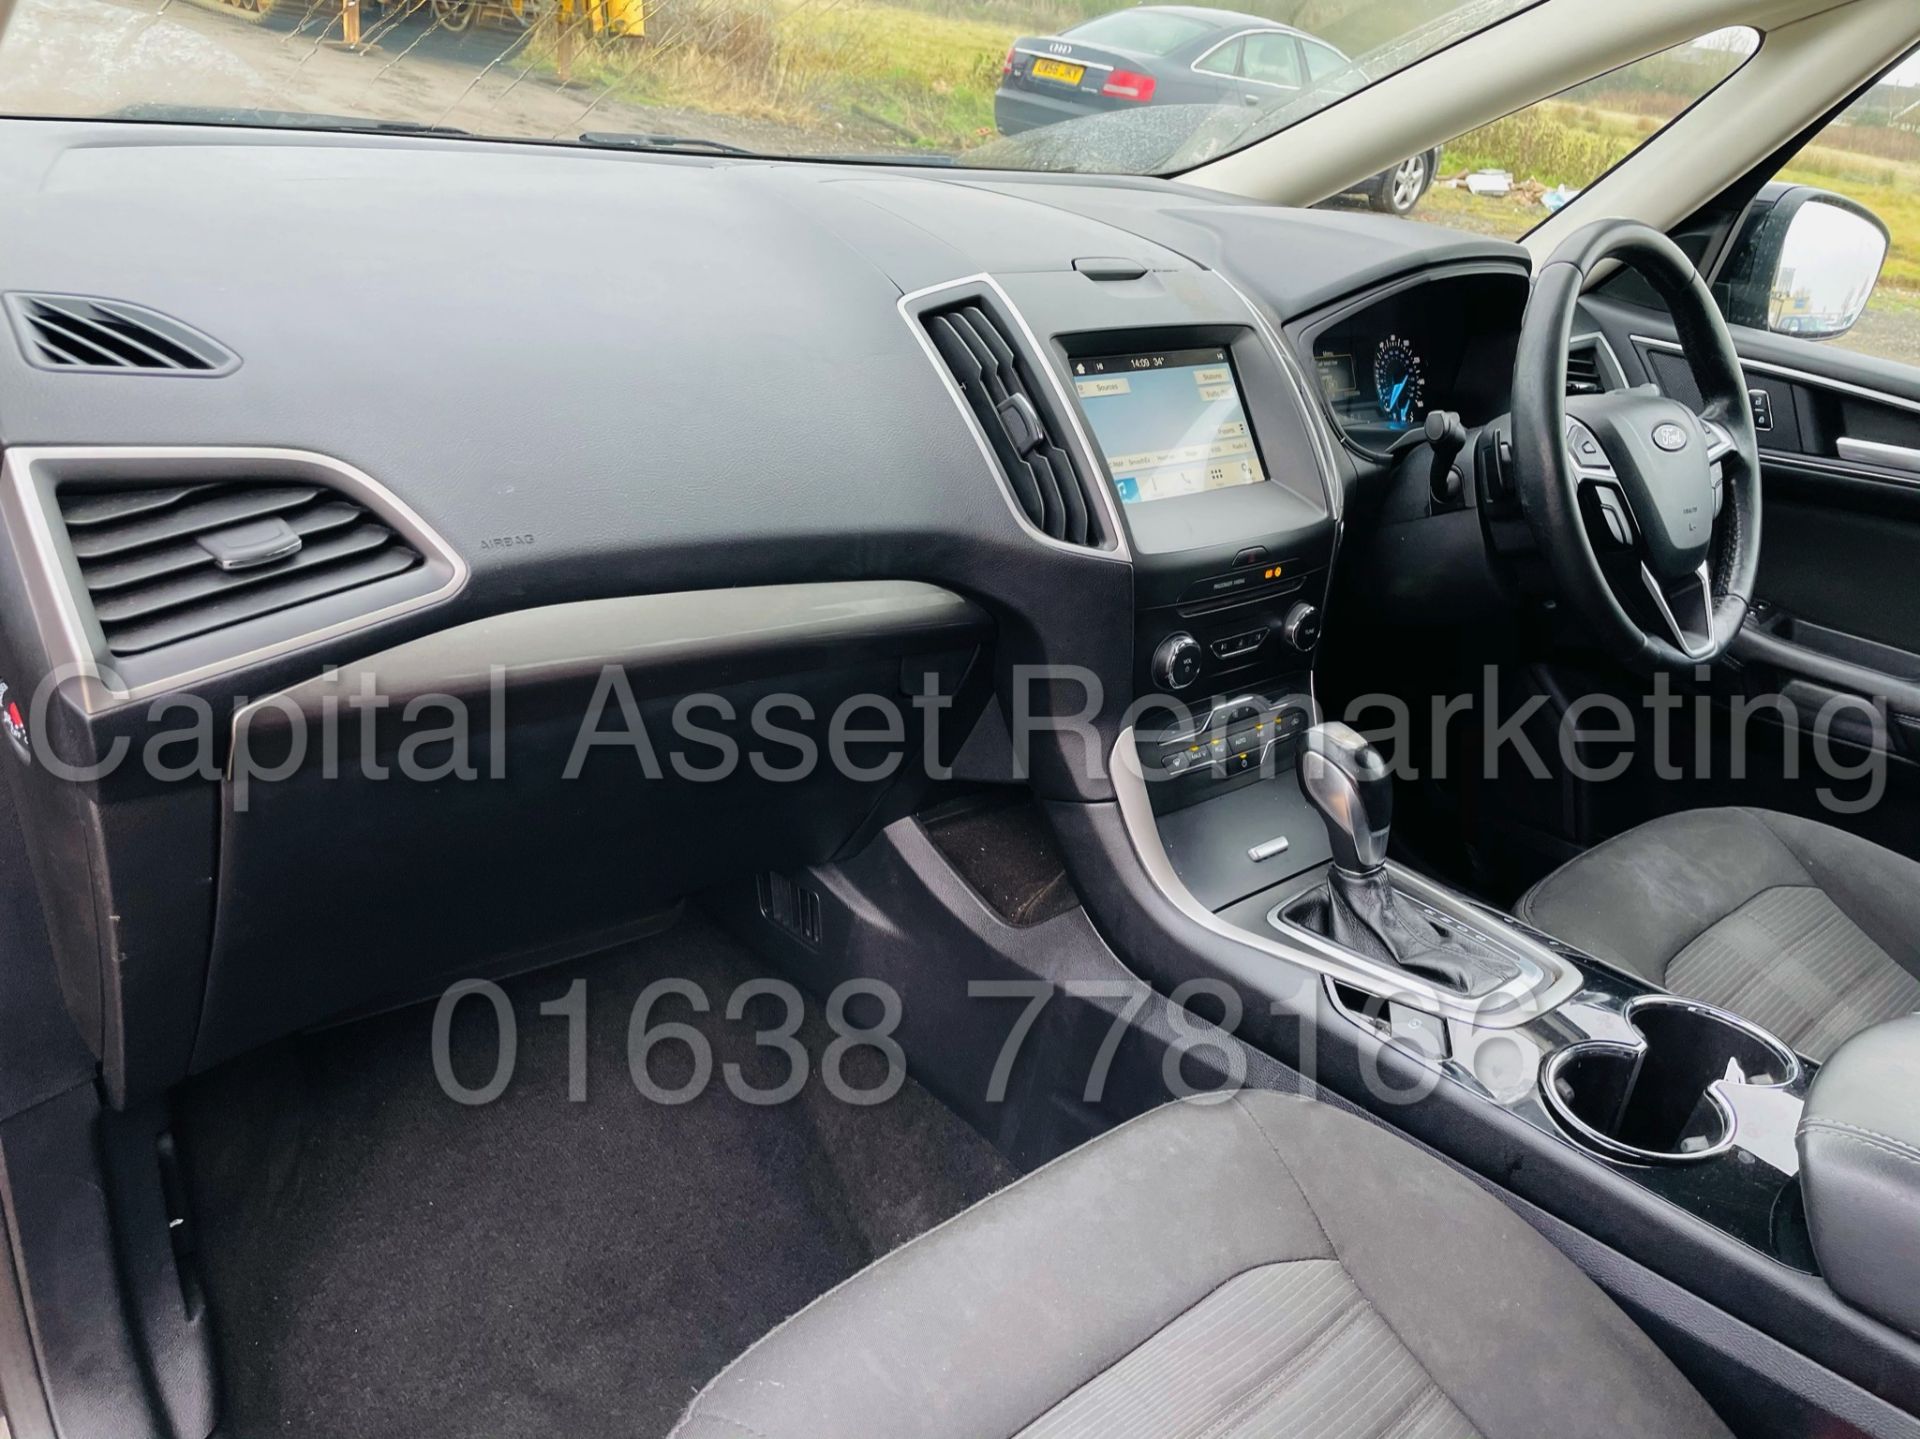 (On Sale) FORD GALAXY *ZETEC EDITION* 7 SEATER MPV (2017 - EURO 6) '2.0 TDCI - AUTO' (1 OWNER) - Image 21 of 48